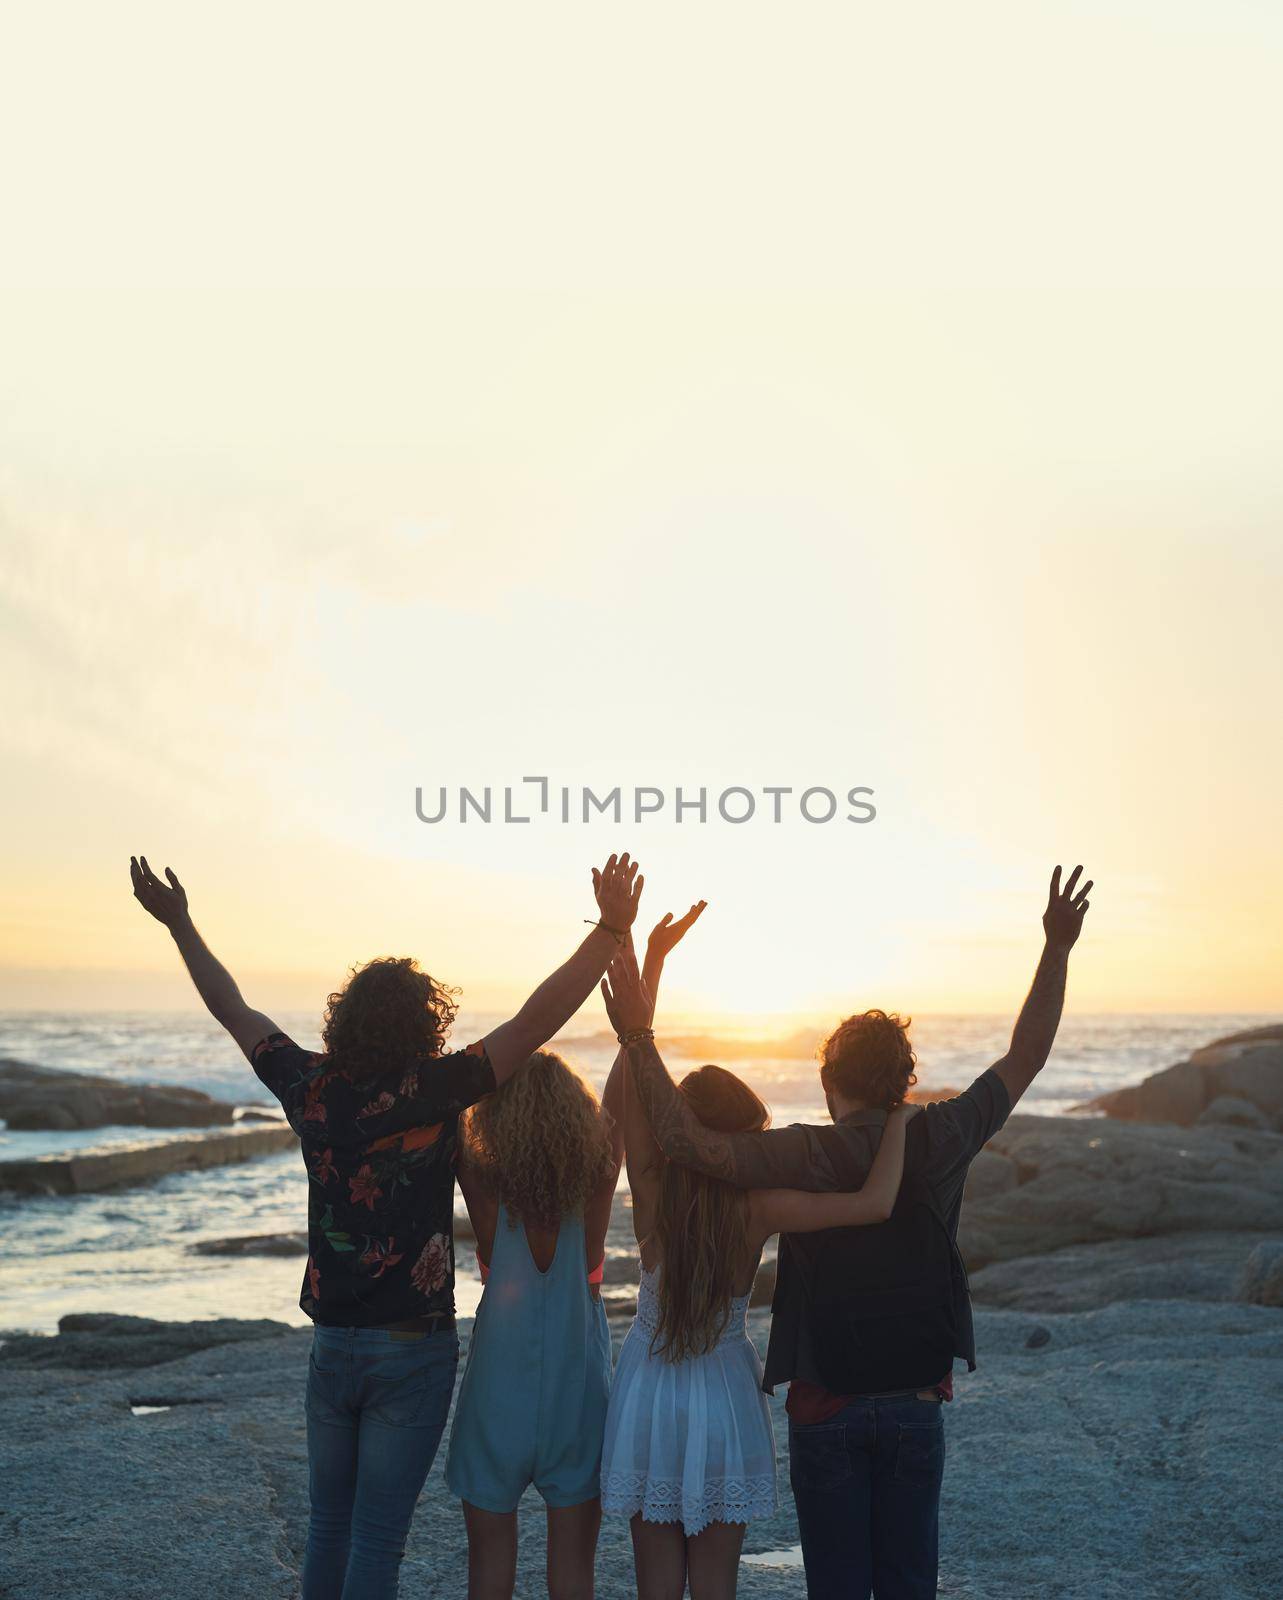 group of friends celebrating arms raised on beach looking at beautiful sunset enjoying summer vacation lifestyle.